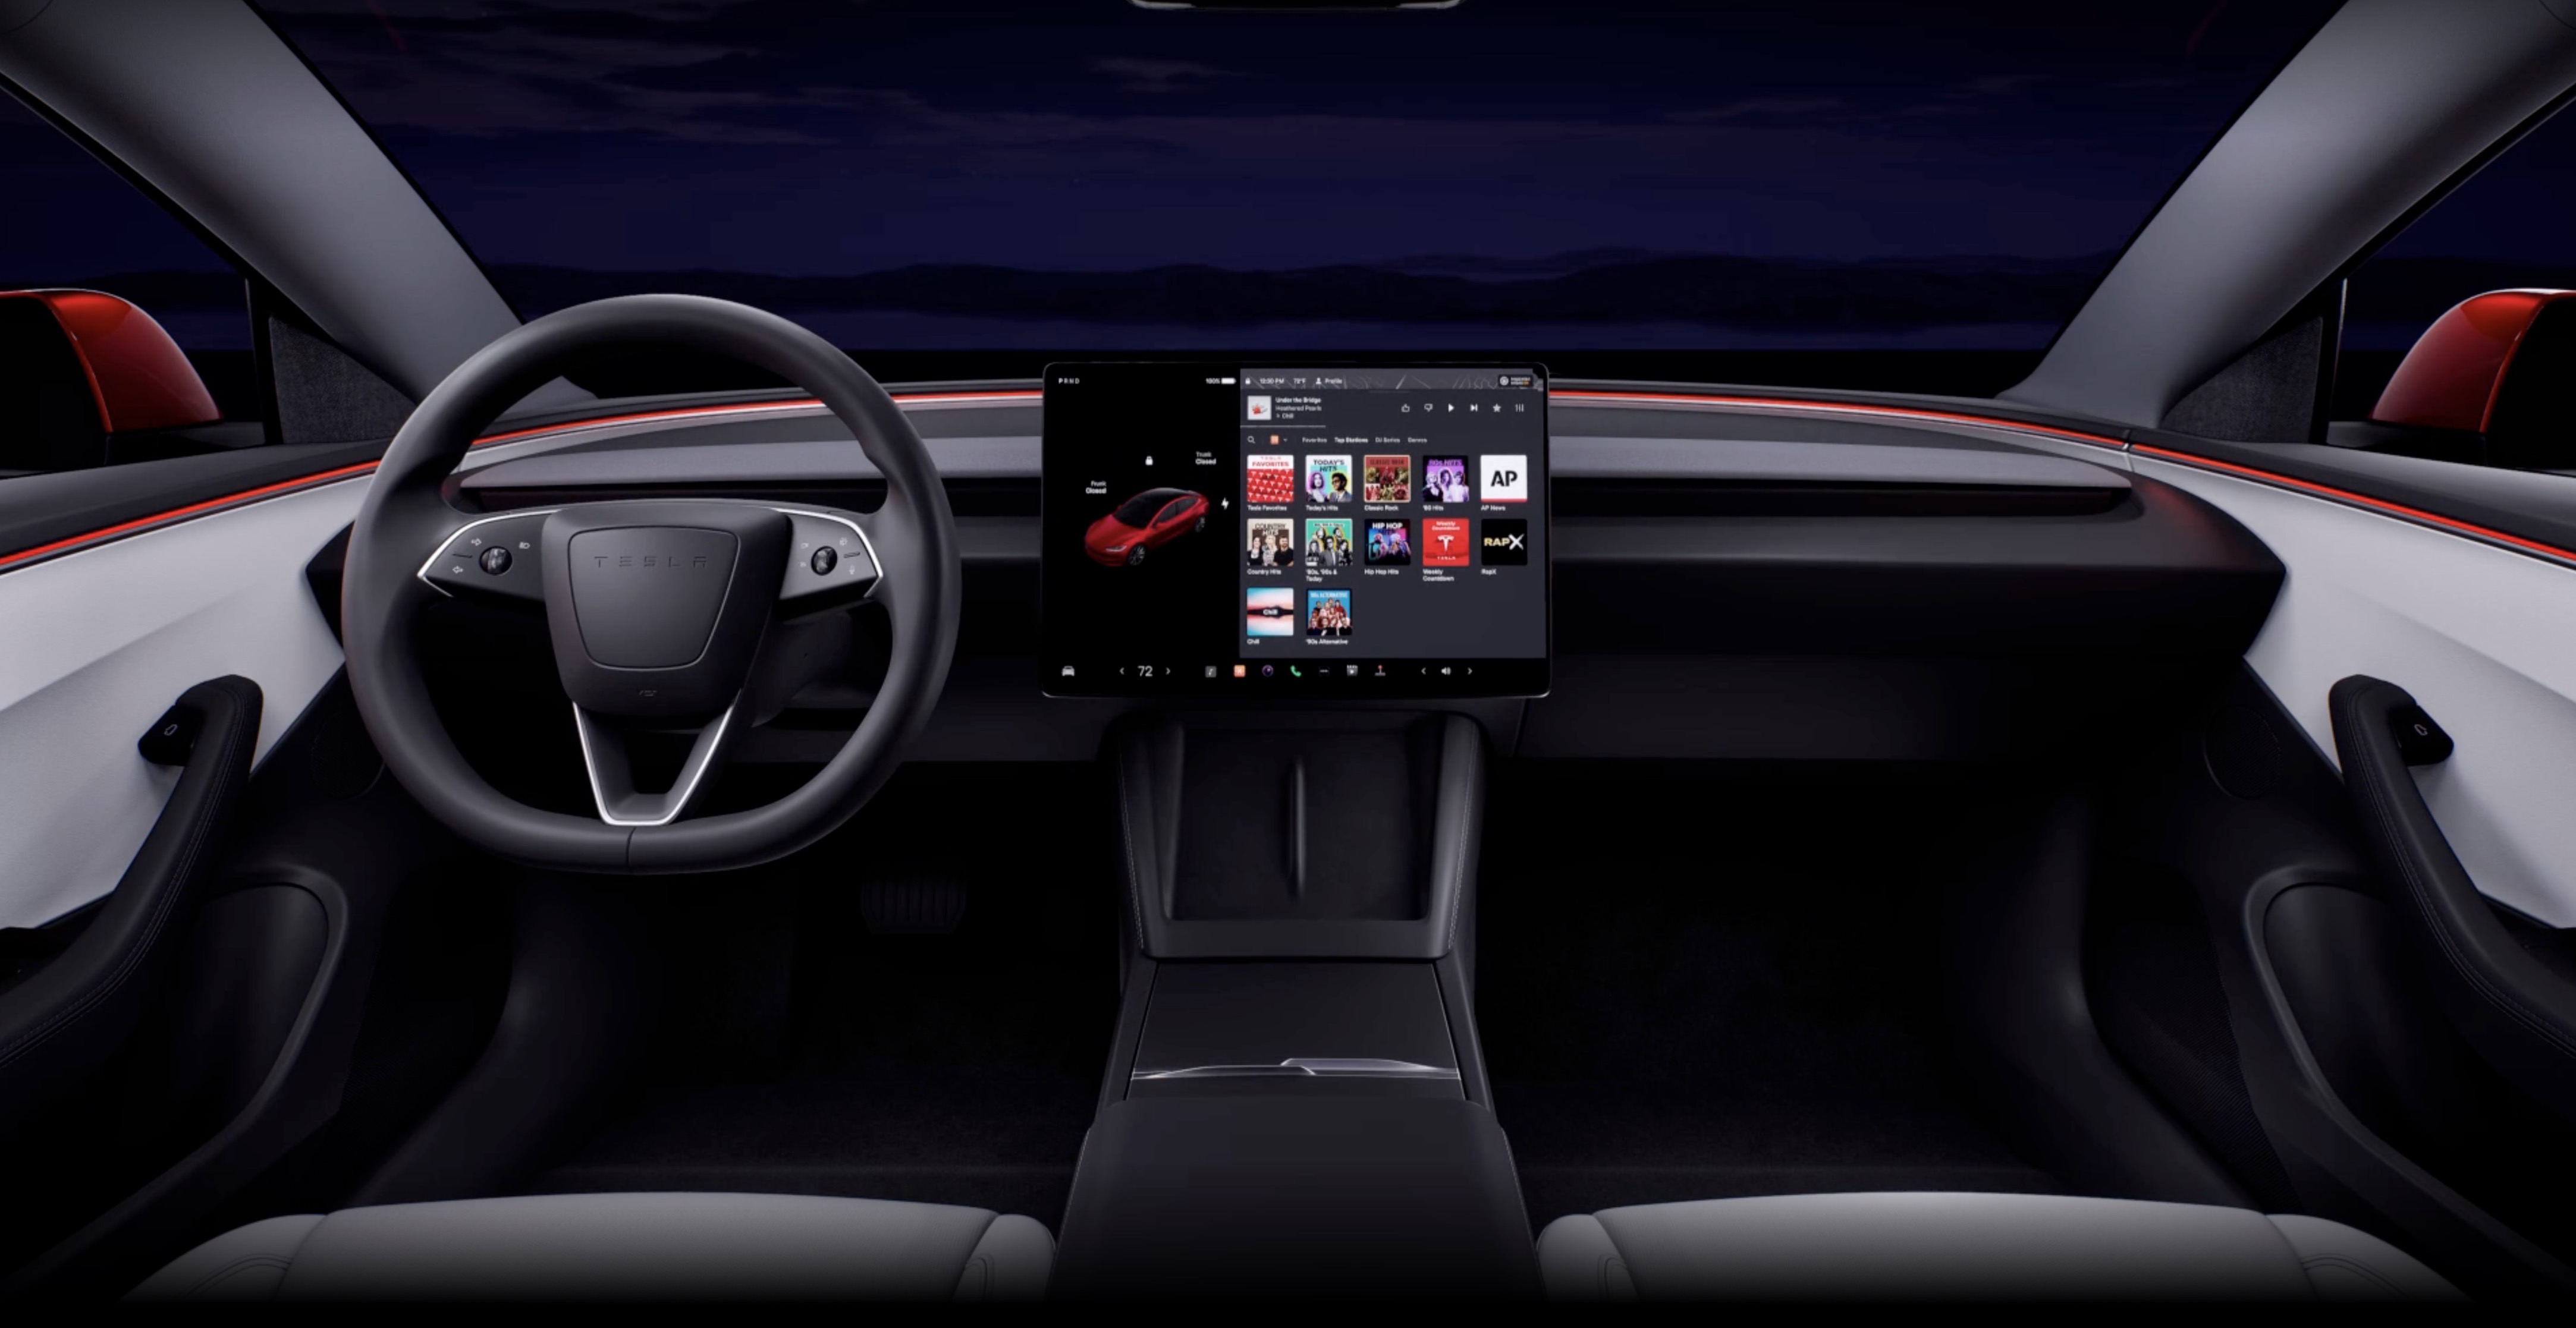 https://electrek.co/2023/08/31/tesla-model-3-highland-officially-unveiled-with-new-design-and-more-features/screenshot-2023-08-31-at-6-27-52-pm/